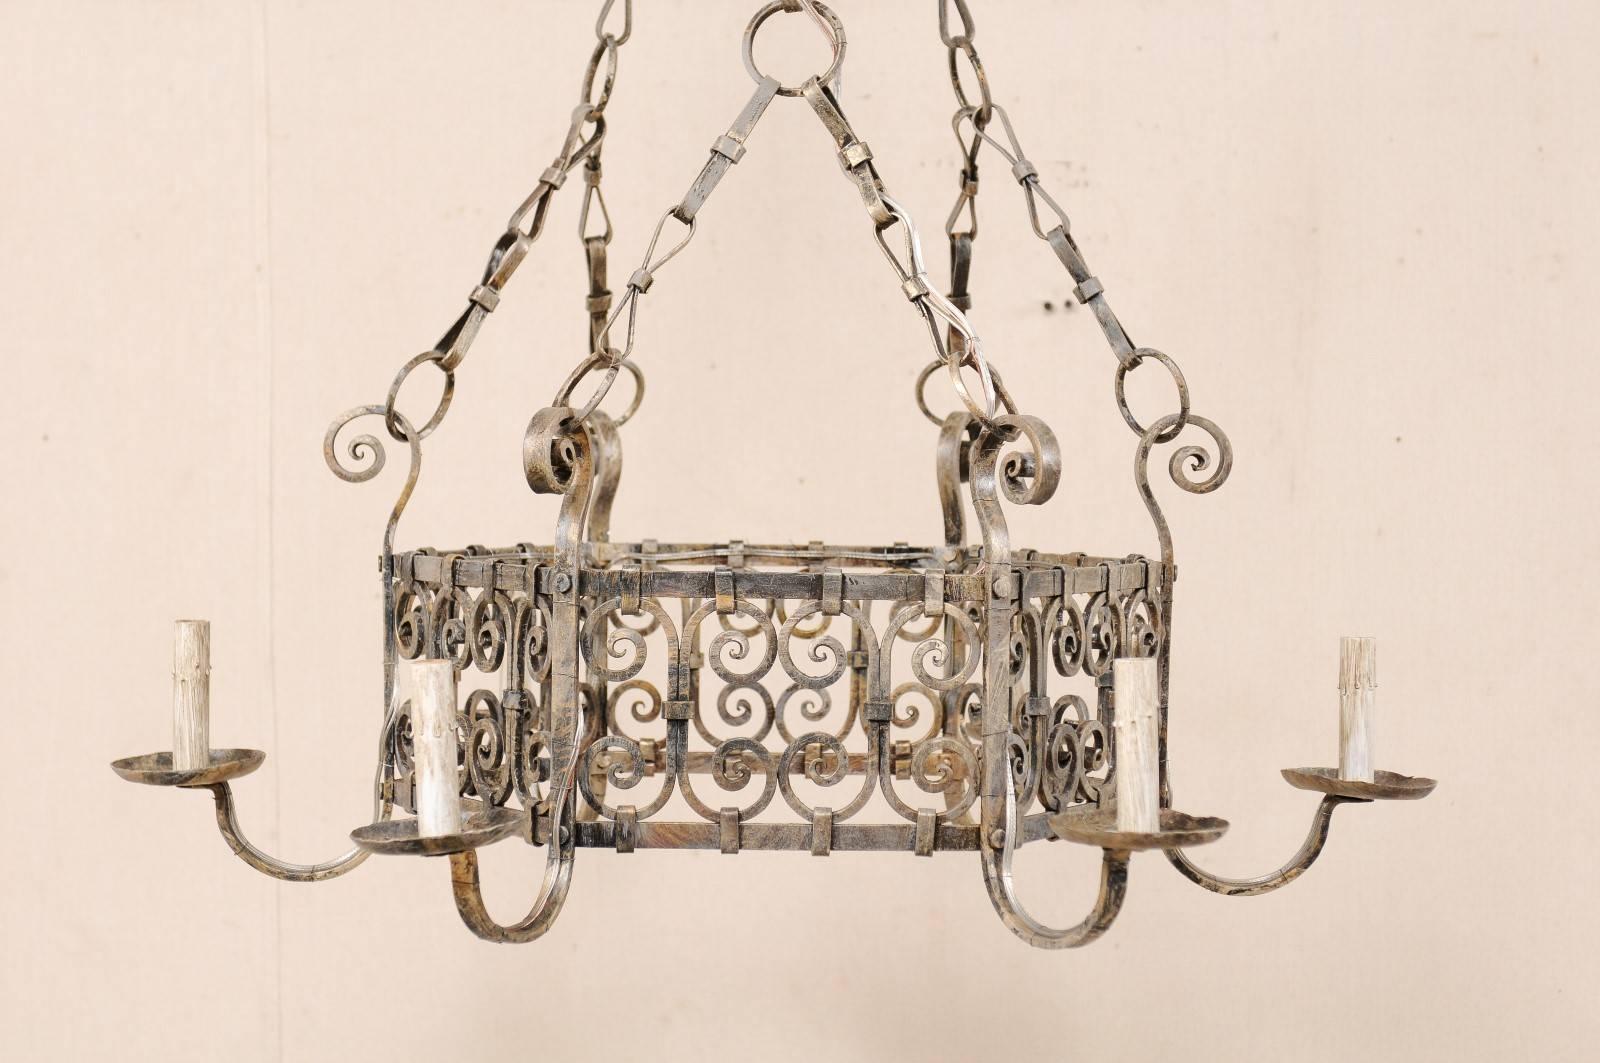 Painted French Six-Light Iron Ring Chandelier w/ Lovely Scrolling Motif & Bow-Tie Chains